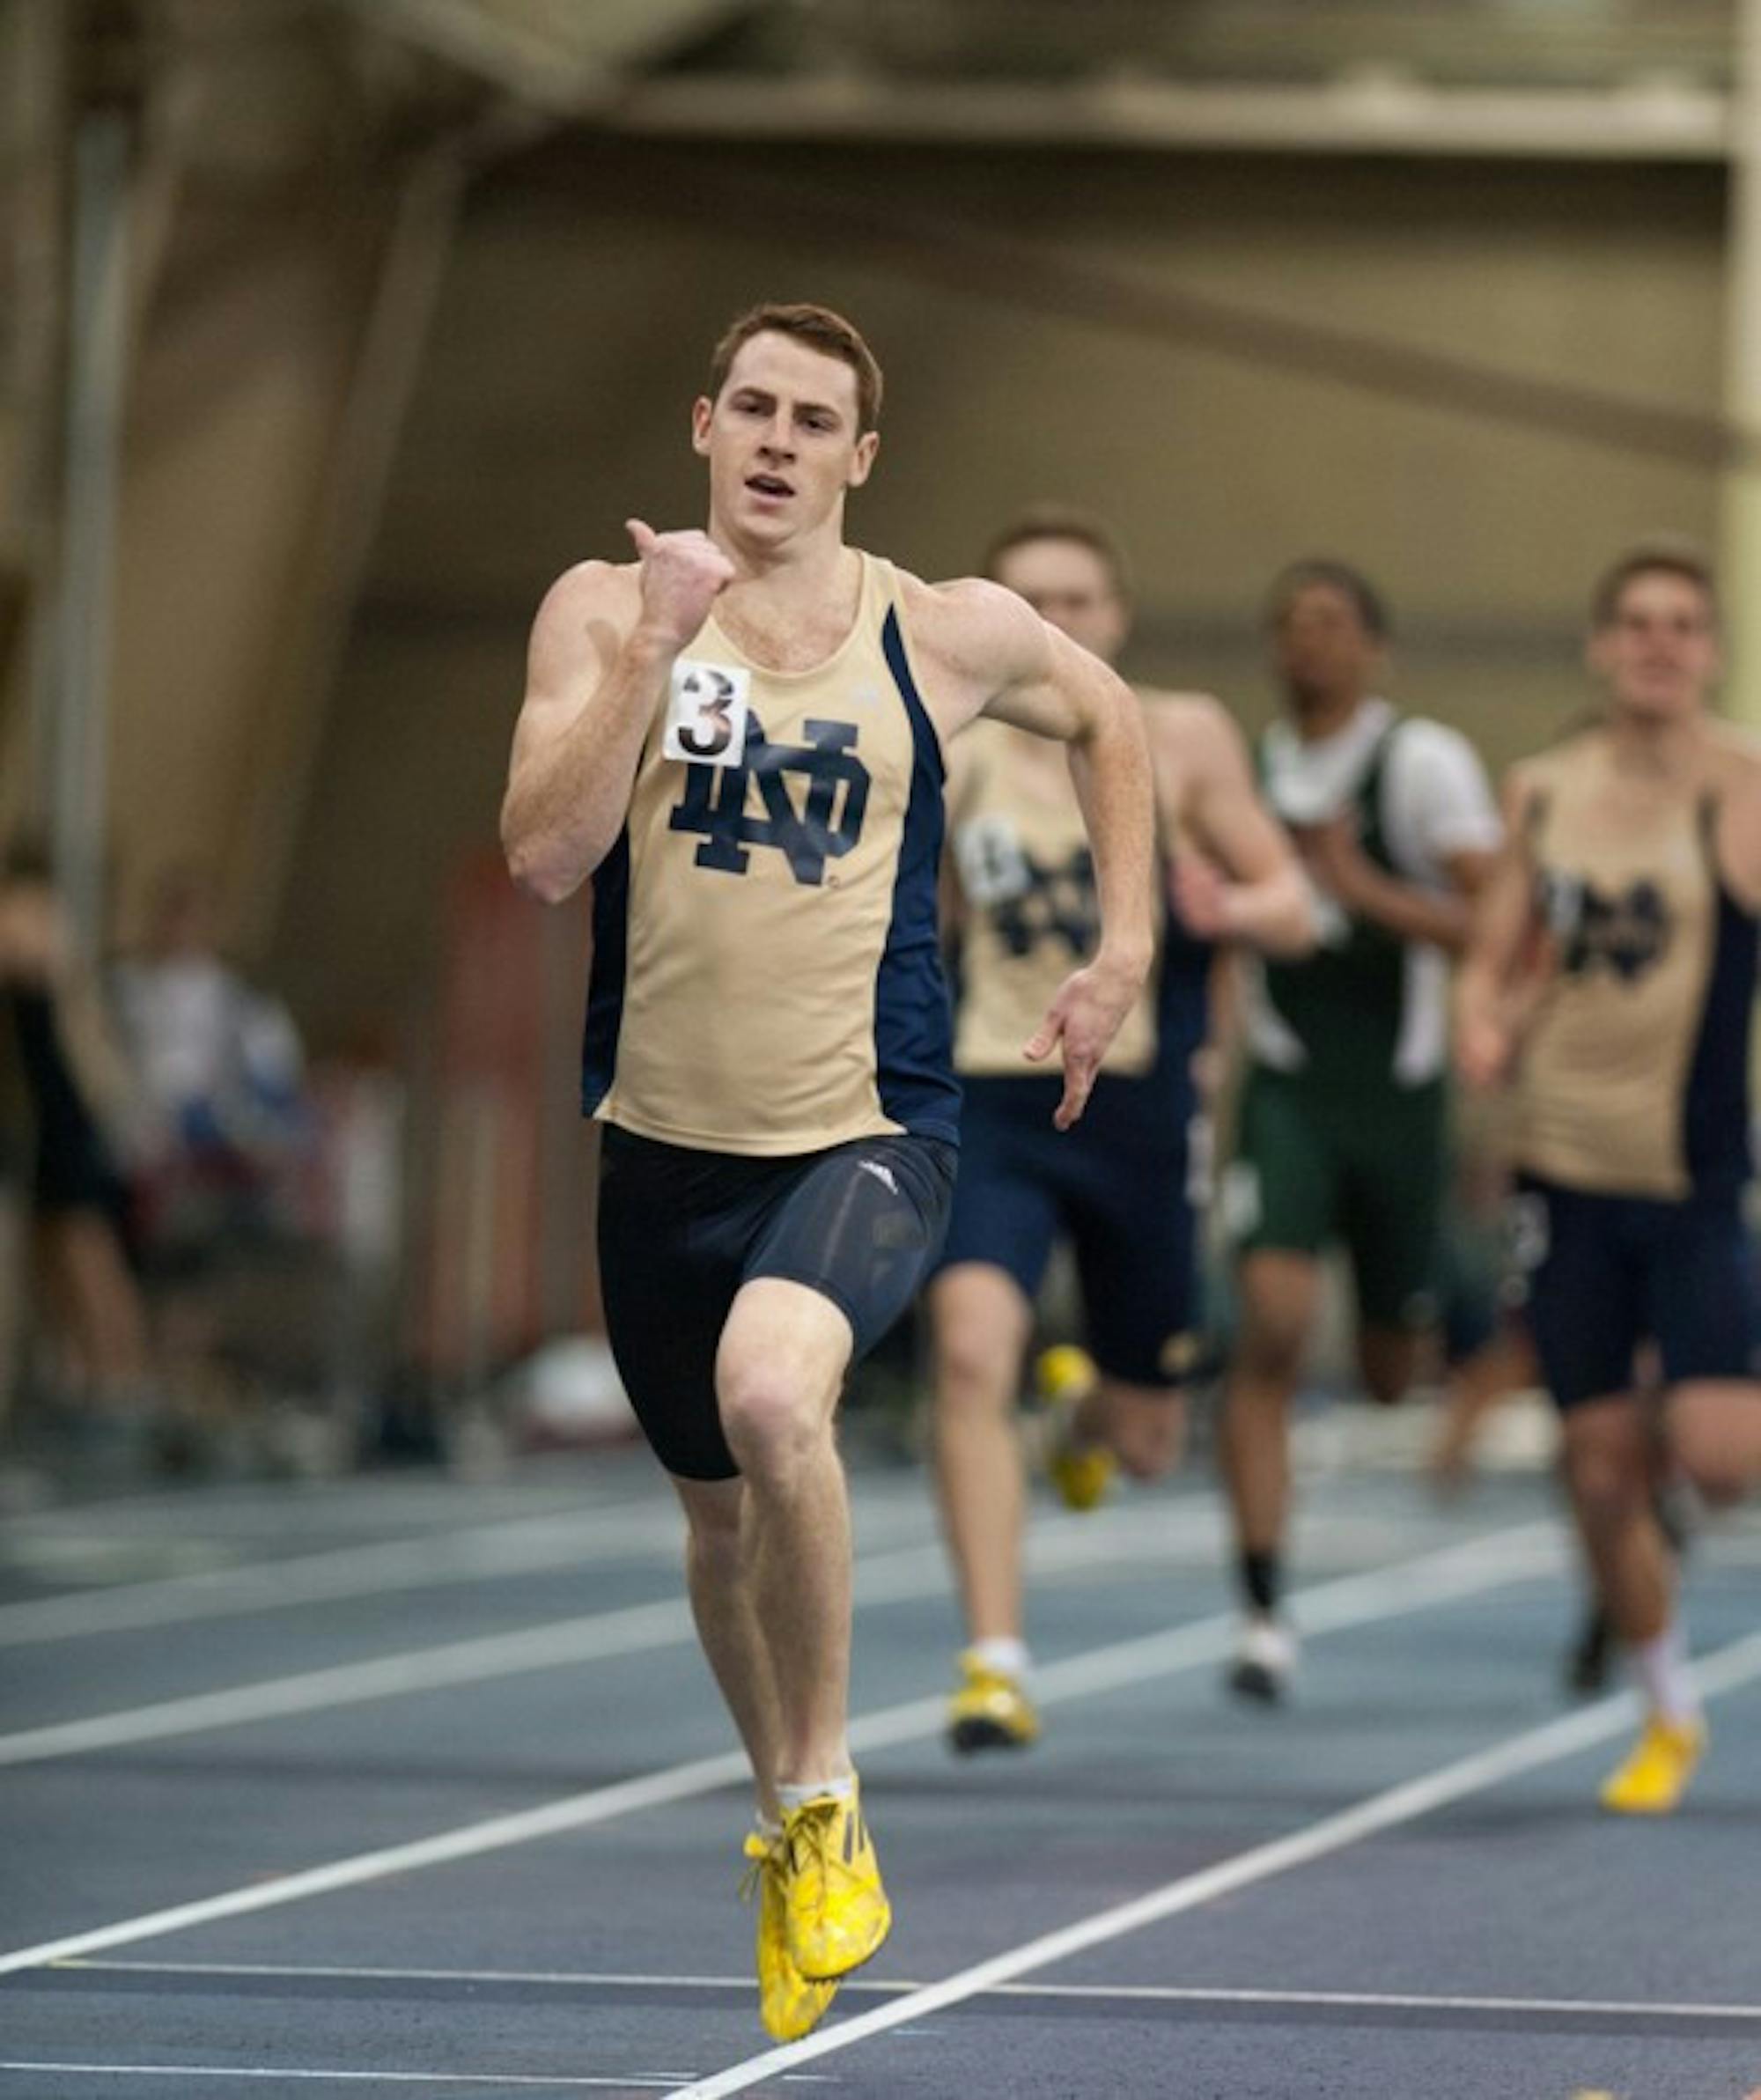 Senior Patrick Feeney races in the 400-meter dash at the Notre Dame Invitational on Jan. 25. Feeney competed in two third-place relays Saturday at the Alex Wilson Invitational.